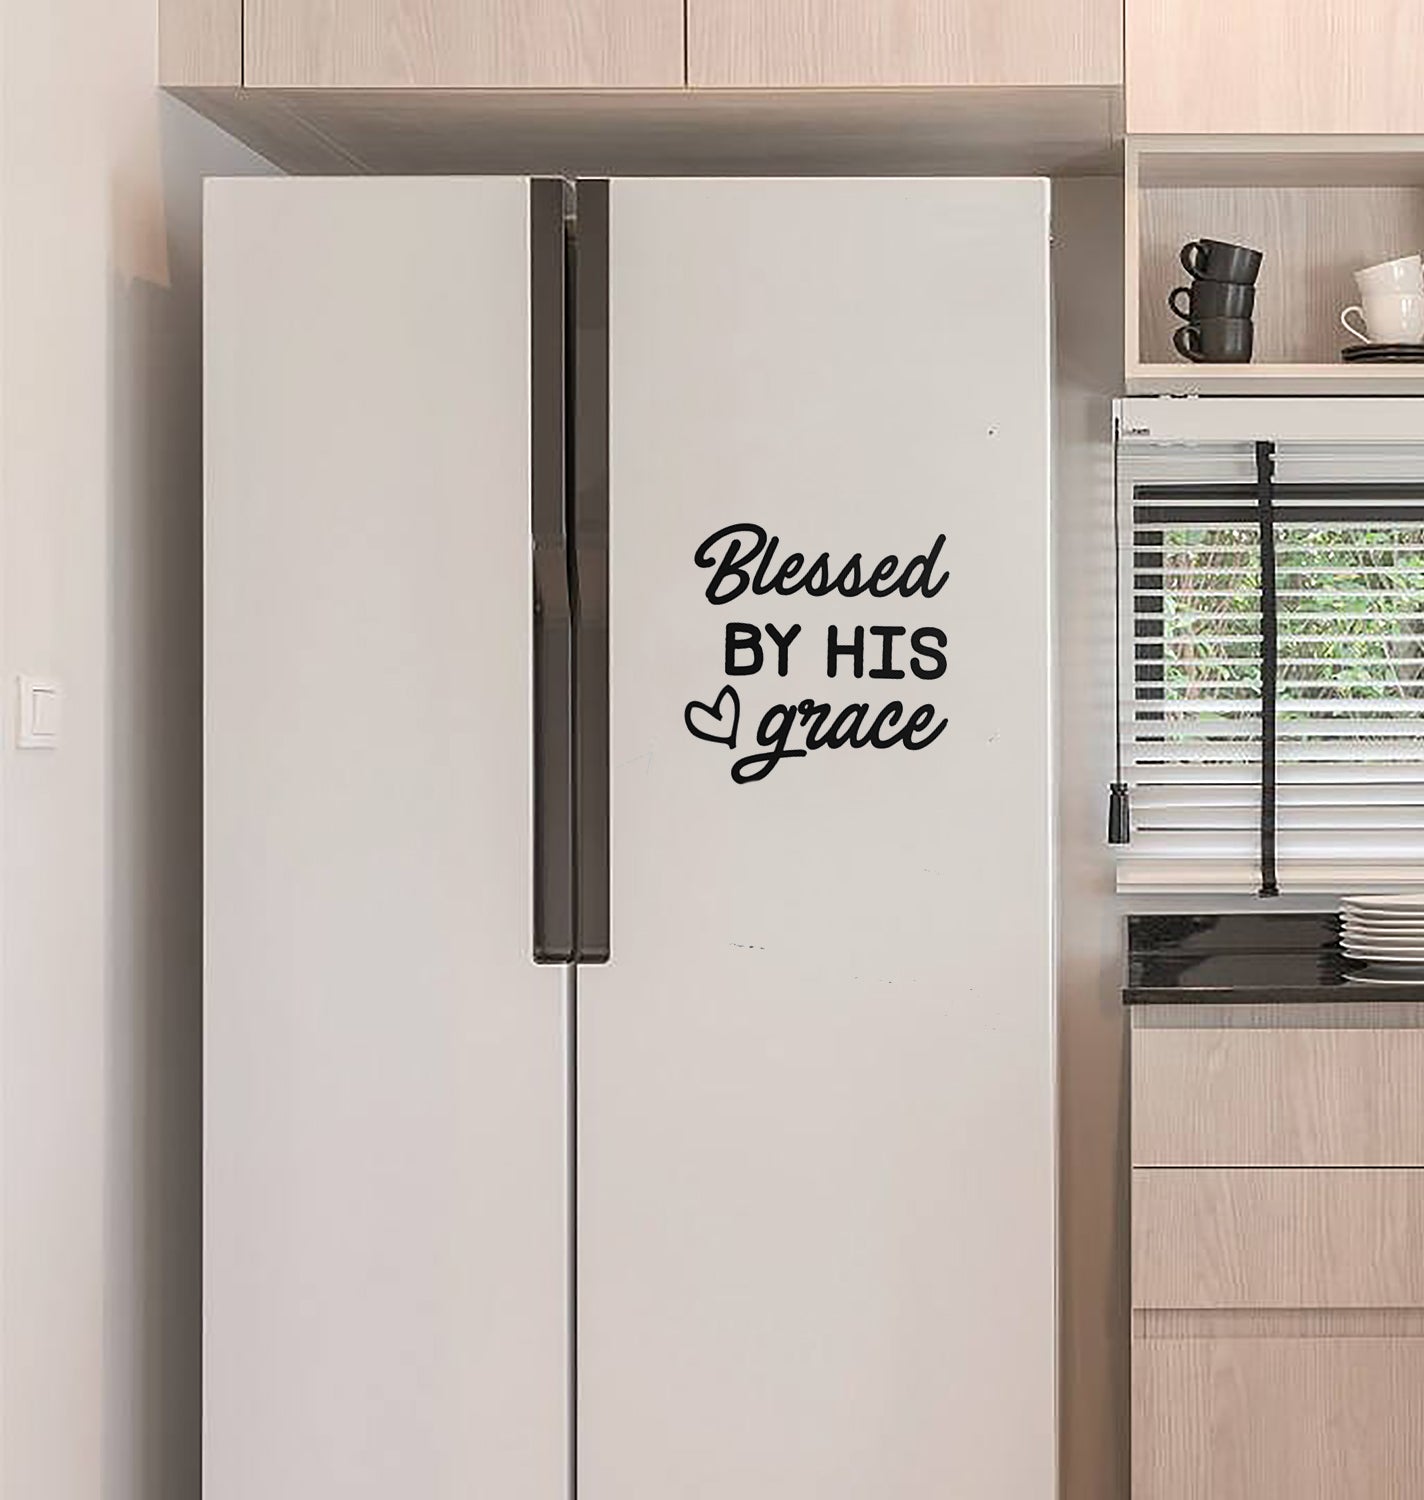 Blessed by his Grace, Playroom Decal Sticker - Home Decal Sticker - Home Decor Sticker - Wall Decal Sticker - Christian Vinyl Decal Sticker